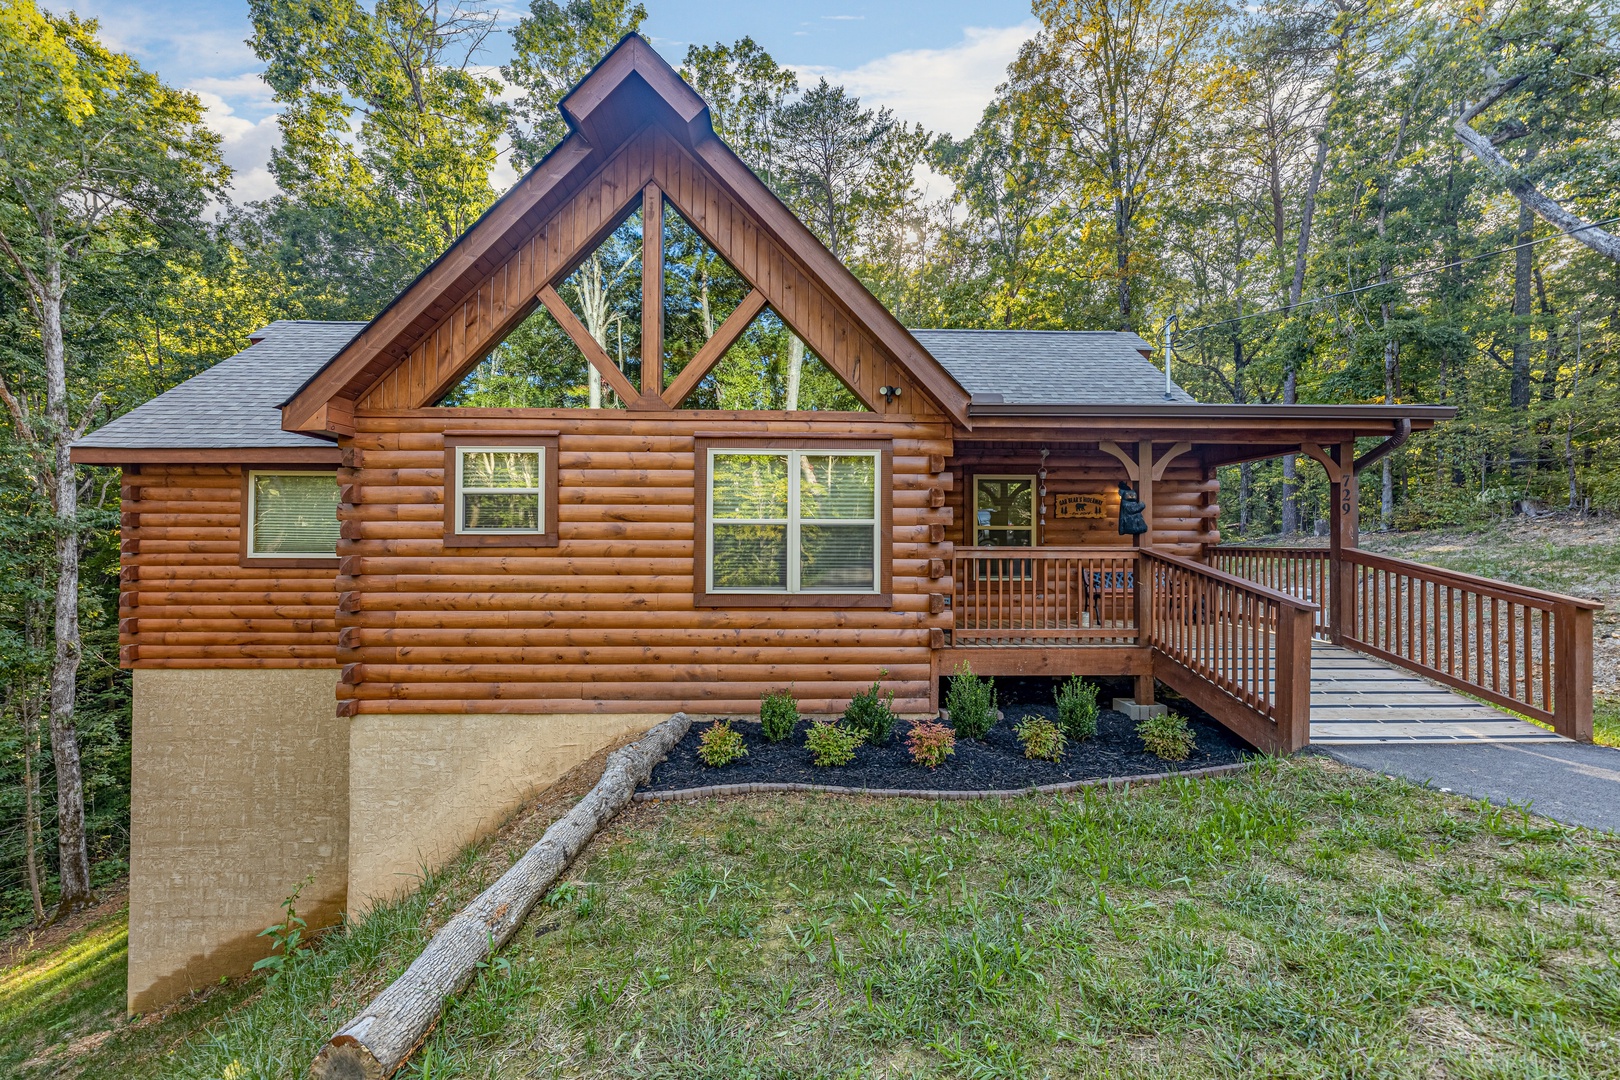 Front yard & cabin exterior at Gar Bear's Hideaway, a Pigeon Forge cabin rental